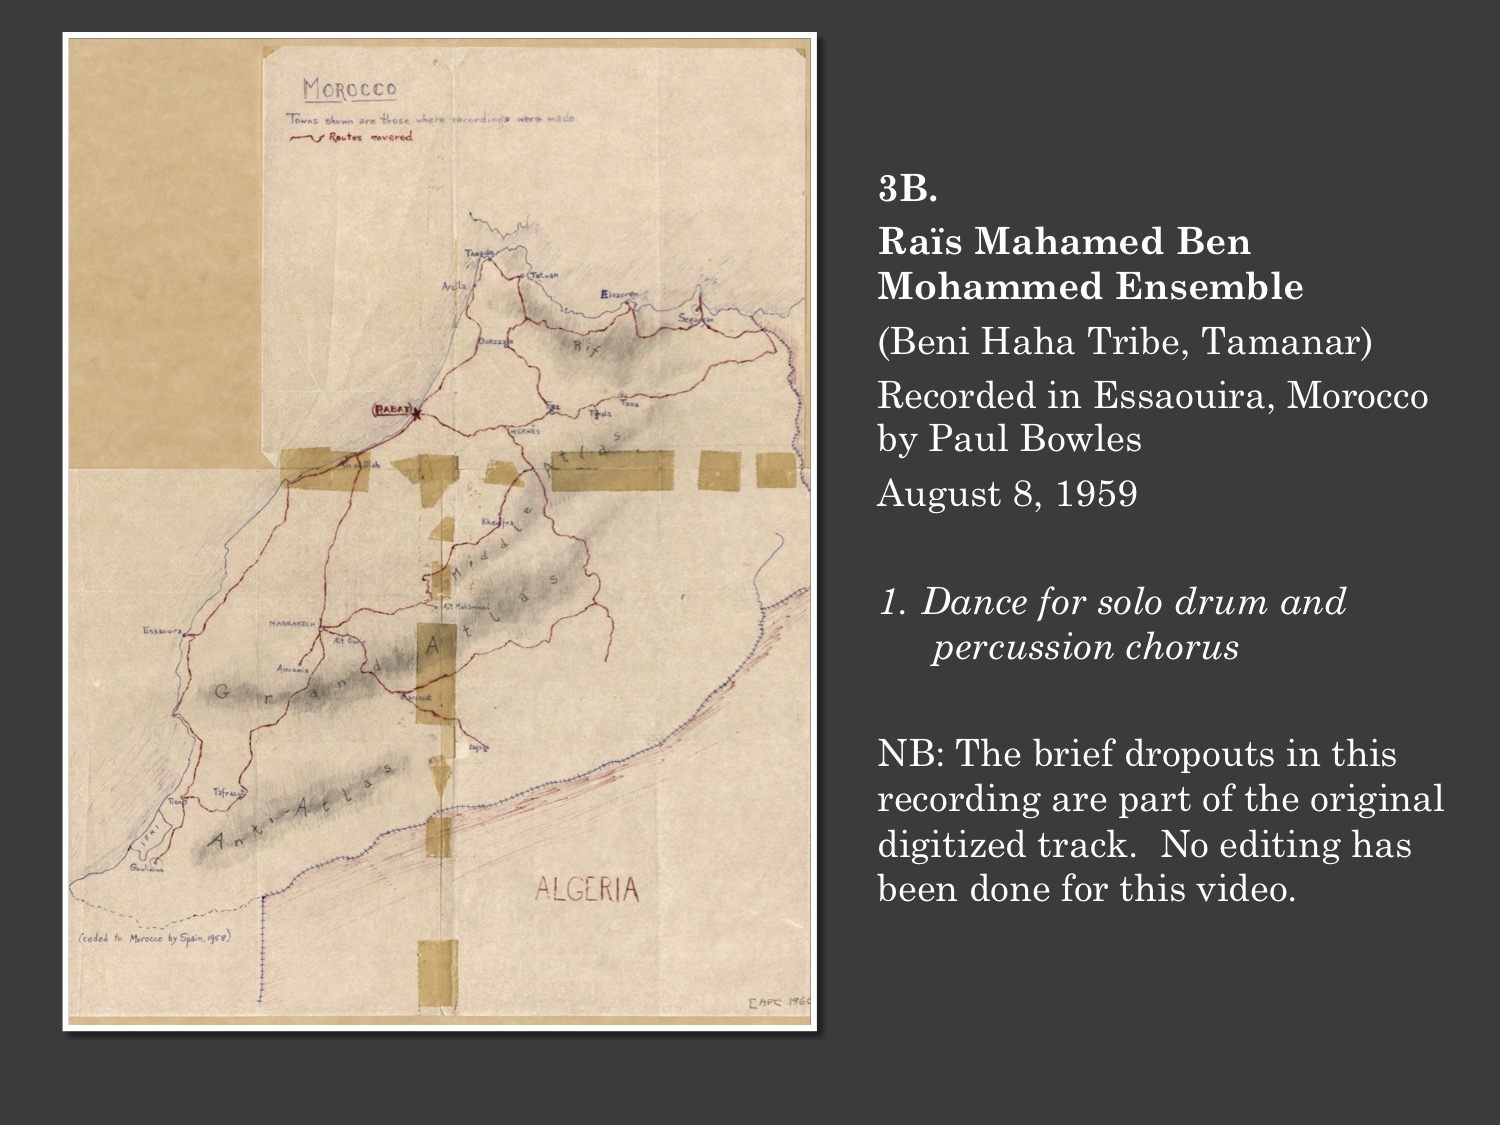 3B. Percussion Raïs Mahamed Ben Mohammed Ensemble
(Beni Haha Tribe, Tamanar)
Recorded in Essaouira, Morocco by Paul Bowles
August 8, 1959

Dance for solo drum and percussion chorus
